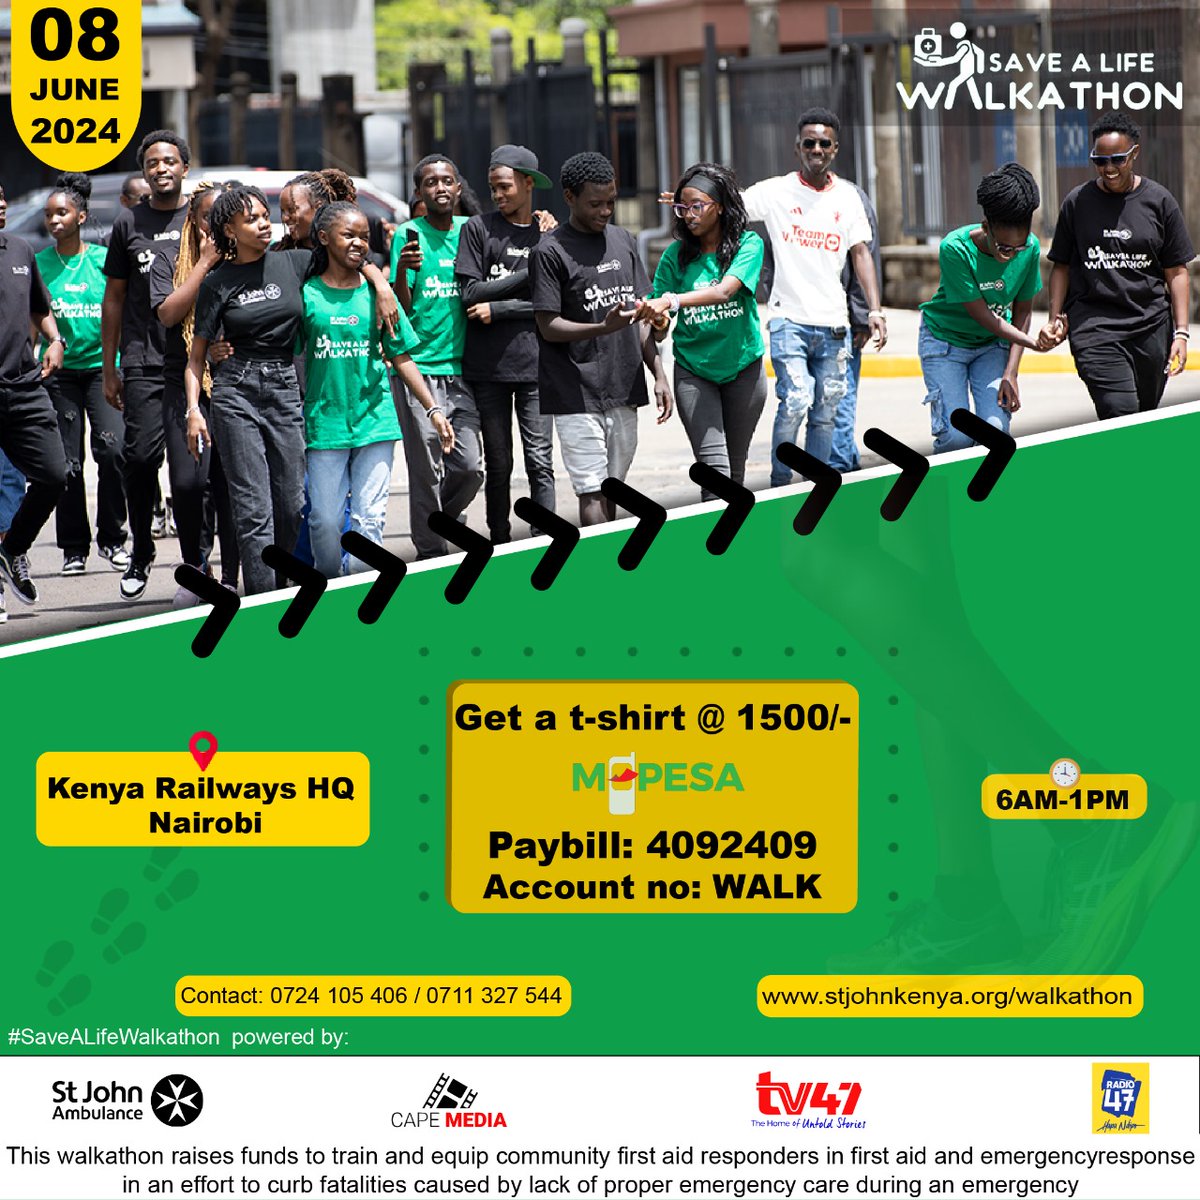 This is how you can participate in Saving A Life...
Sign UP for the #SaveALifeWalkathon on stjohnkenya.org/walkathon
Buy  a charity T-shirt at 1500/.
Join us on 8th of June at the Kenya Railways Grounds, Nairobi from 6am for 5km, 10km or 21km health walk. #Walkathon